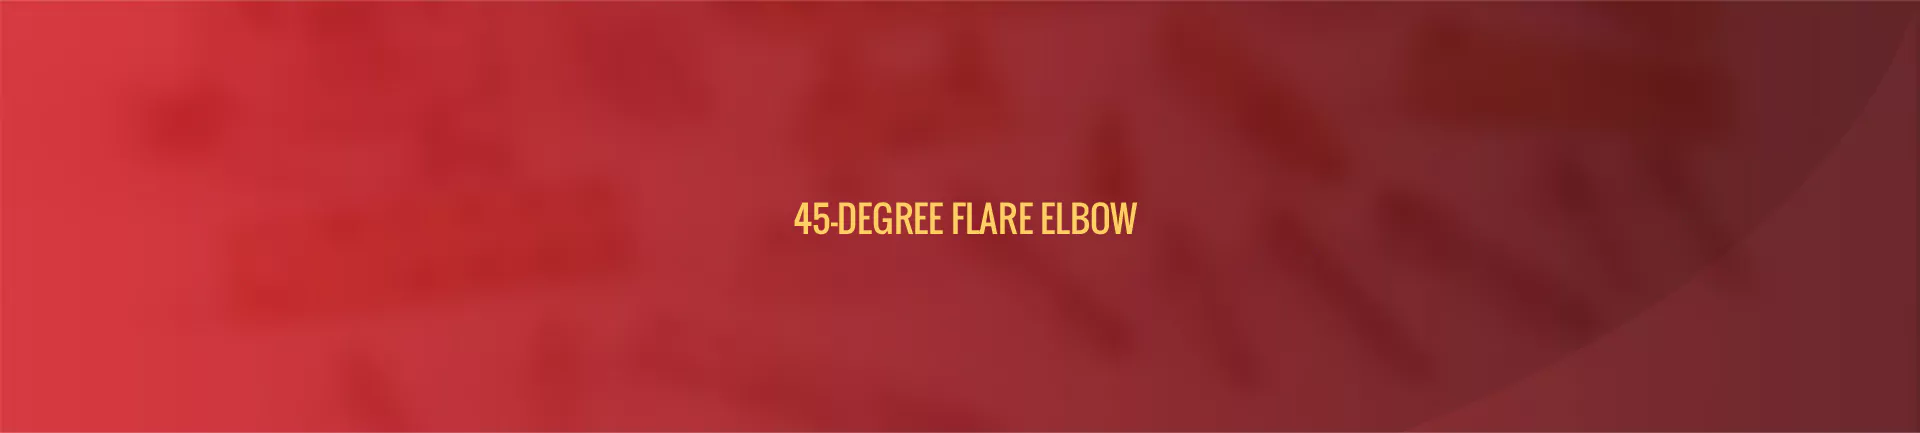 45_degree_flare_elbow-banner